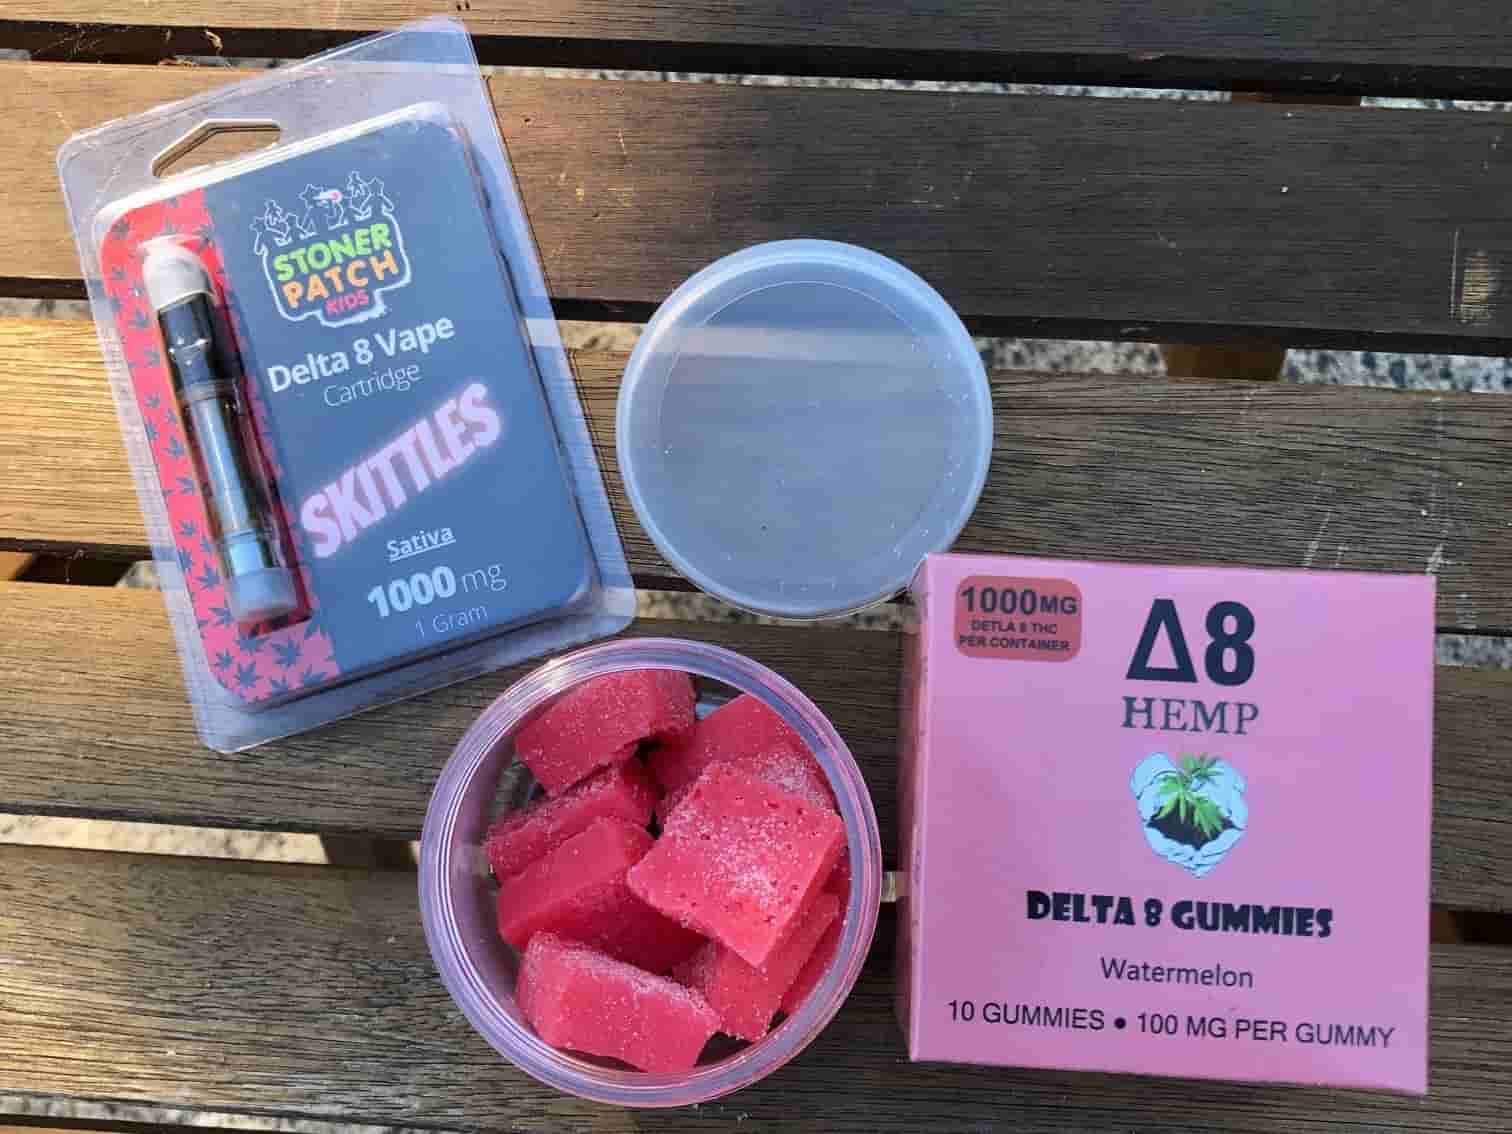 DELTA 8 CLEVELAND TN - Gummies|Thc|Products|Hemp|Product|Brand|Effects|Delta|Gummy|Cbd|Origin|Quality|Dosage|Delta-8|Dose|Usasource|Flavors|Brands|Ingredients|Range|Customers|Edibles|Cartridges|Reviews|Side|List|Health|Cannabis|Lab|Customer|Options|Benefits|Overviewproducts|Research|Time|Market|Drug|Farms|Party|People|Delta-8 Thc|Delta-8 Products|Delta-9 Thc|Delta-8 Gummies|Delta-8 Thc Products|Delta-8 Brands|Customer Reviews|Brand Overviewproducts|Drug Tests|Free Shipping|Similar Benefits|Vape Cartridges|Hemp Doctor|United States|Third Party Lab|Drug Test|Thc Edibles|Health Canada|Cannabis Plant|Side Effects|Organic Hemp|Diamond Cbd|Reaction Time|Legal Hemp|Psychoactive Effects|Psychoactive Properties|Third Party|Dry Eyes|Delta-8 Market|Tolerance Level